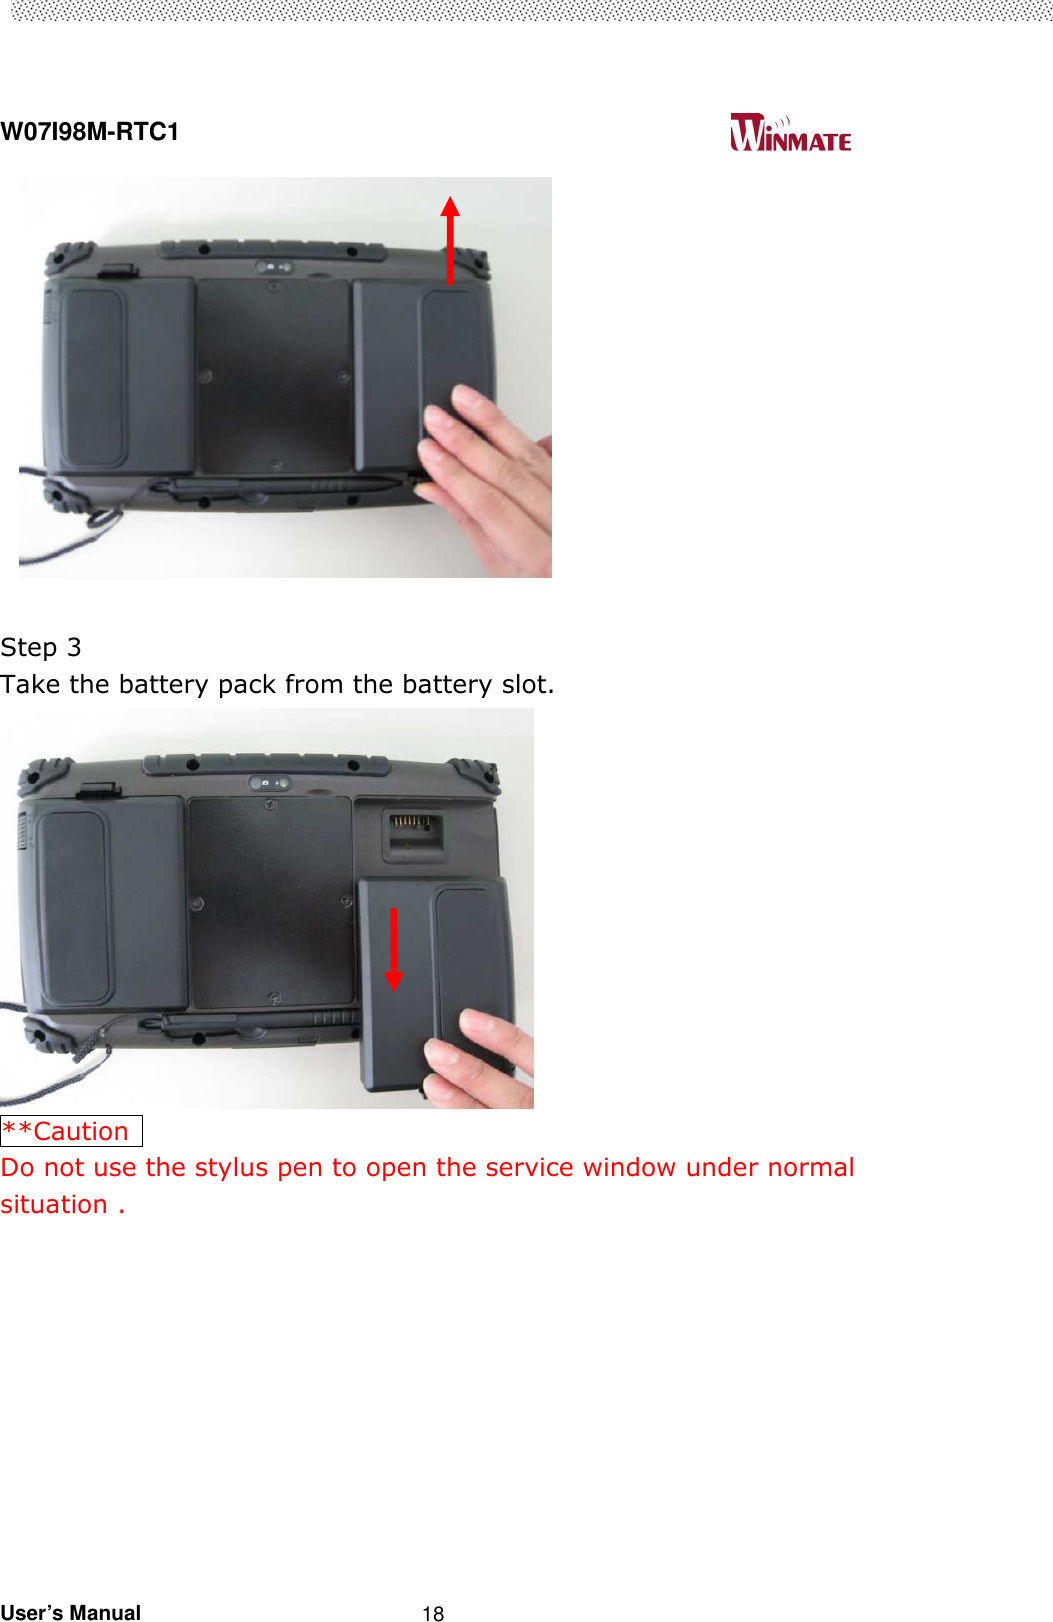  W07I98M-RTC1                                                                                   User’s Manual                                                   18             Step 3   Take the battery pack from the battery slot.  **Caution   Do not use the stylus pen to open the service window under normal situation .      